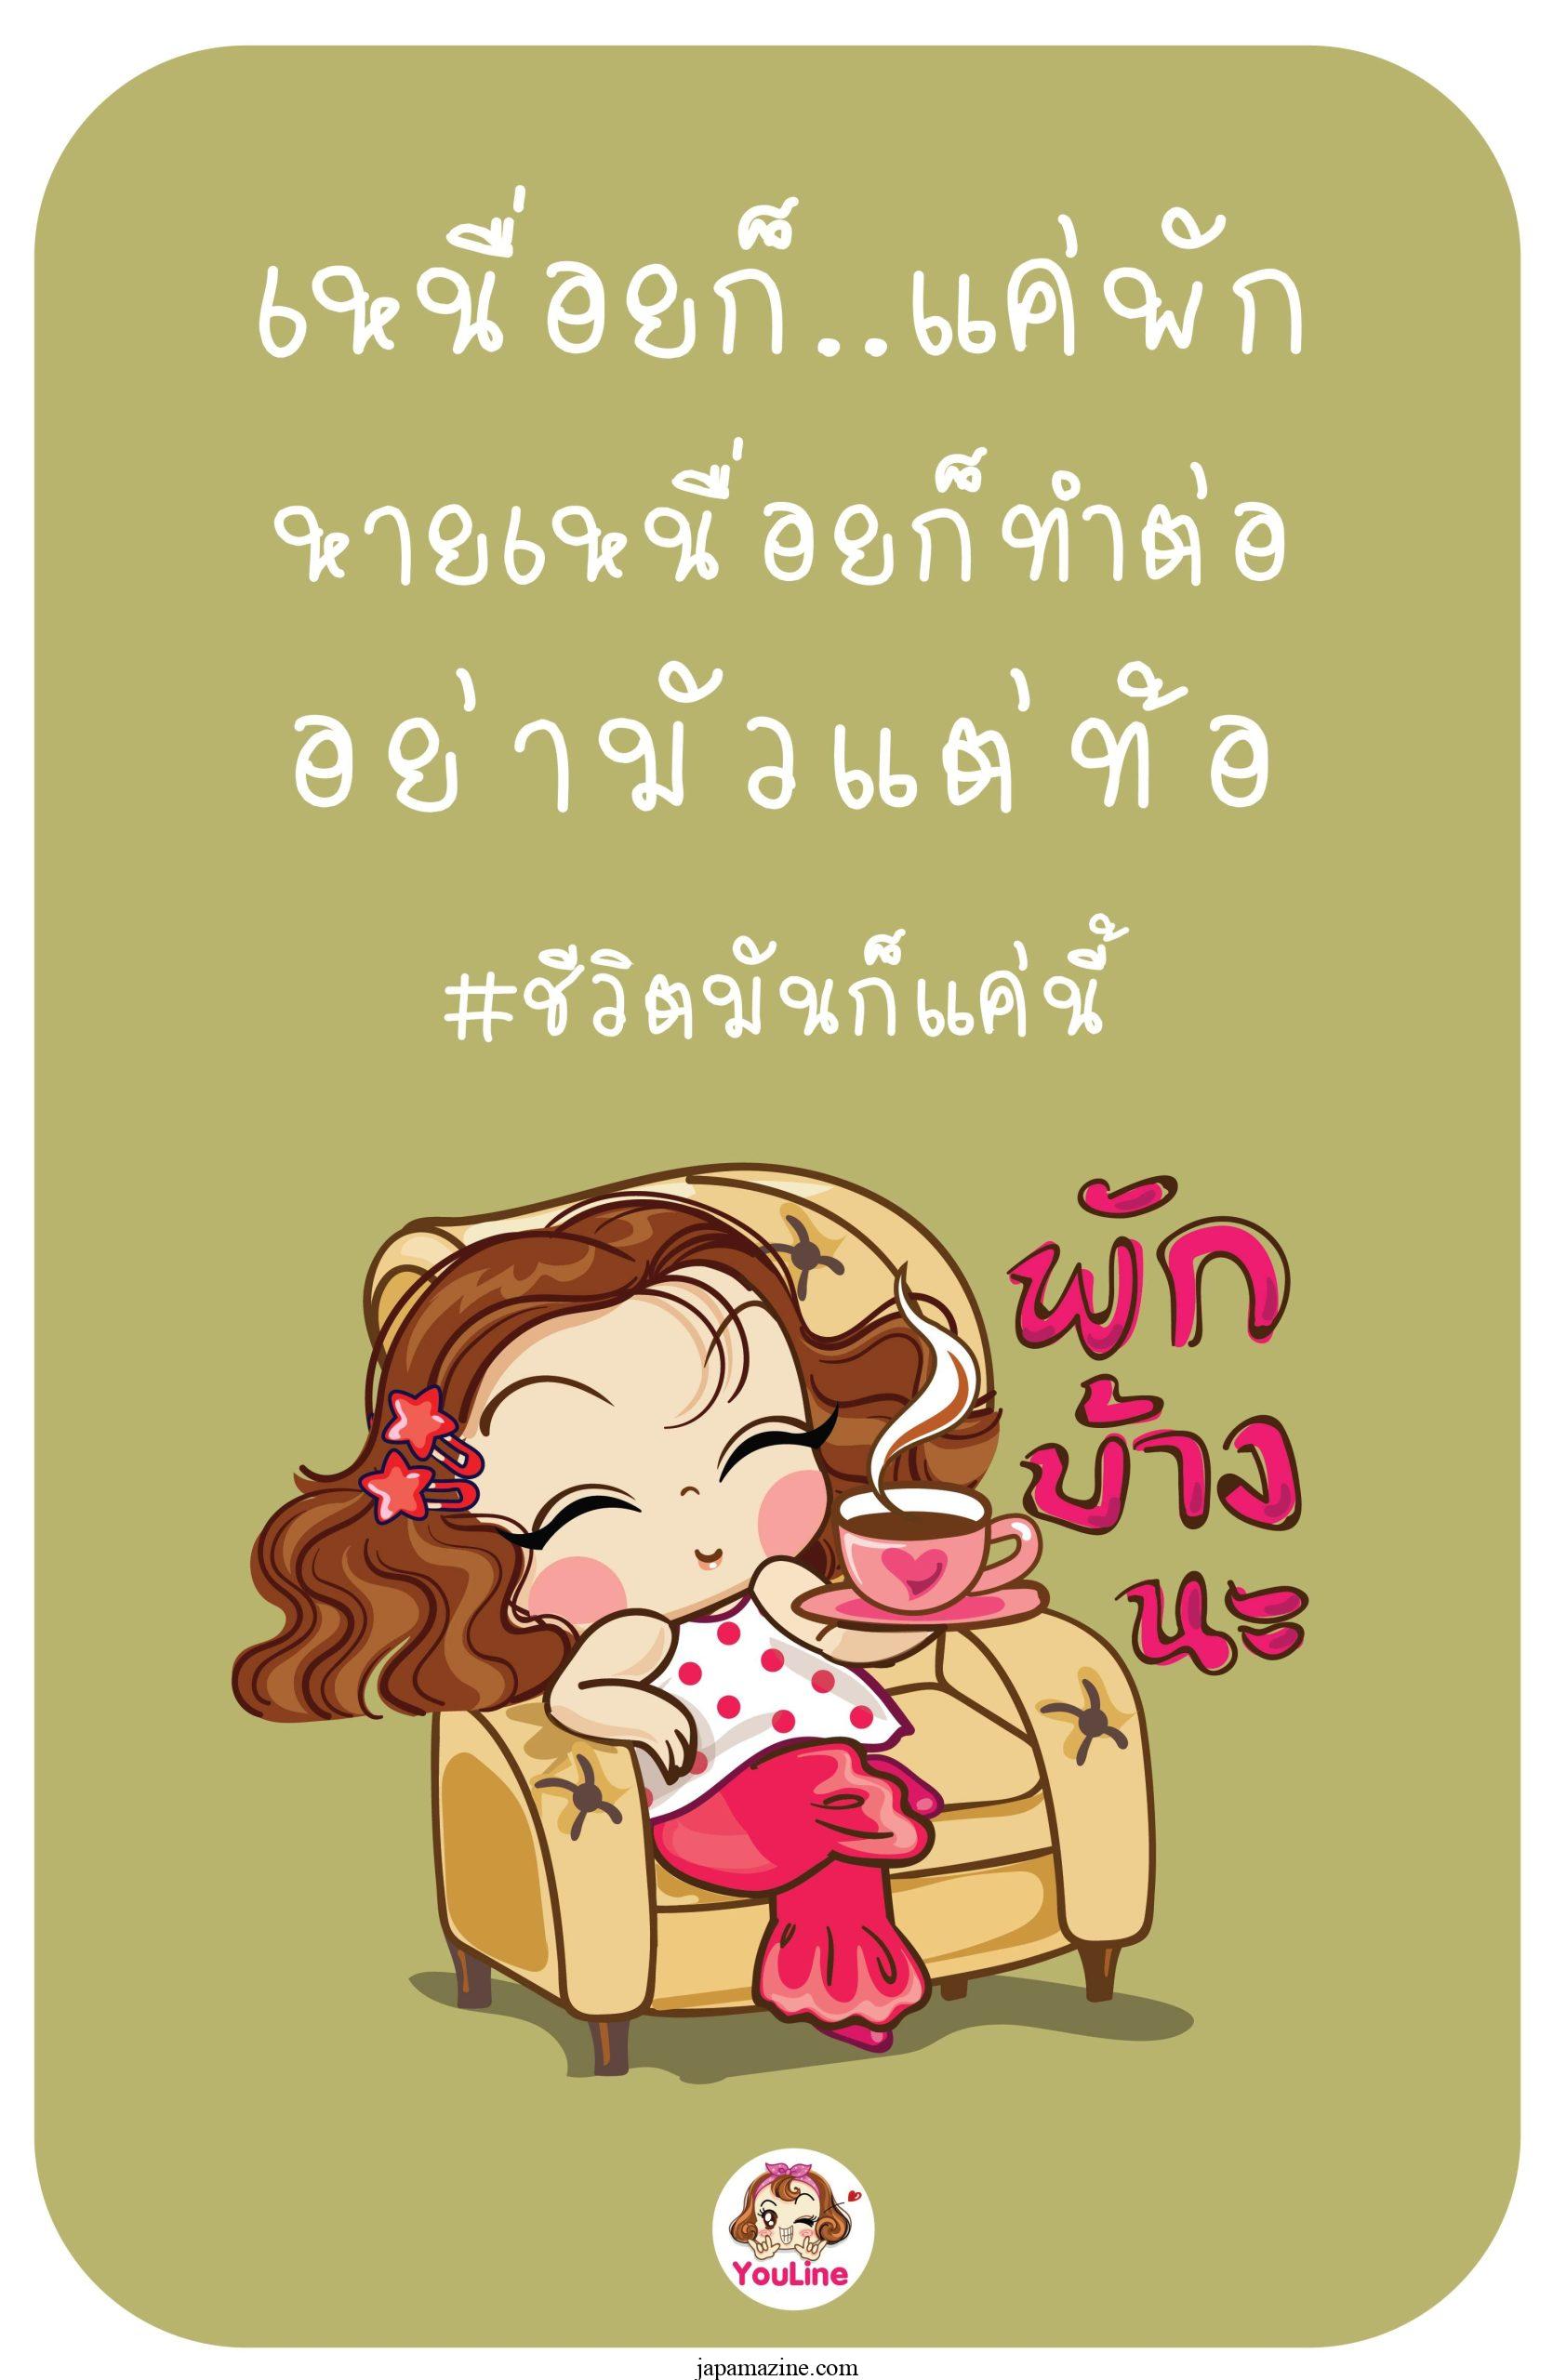 45 Working peopleWork captionBoth Thai and English